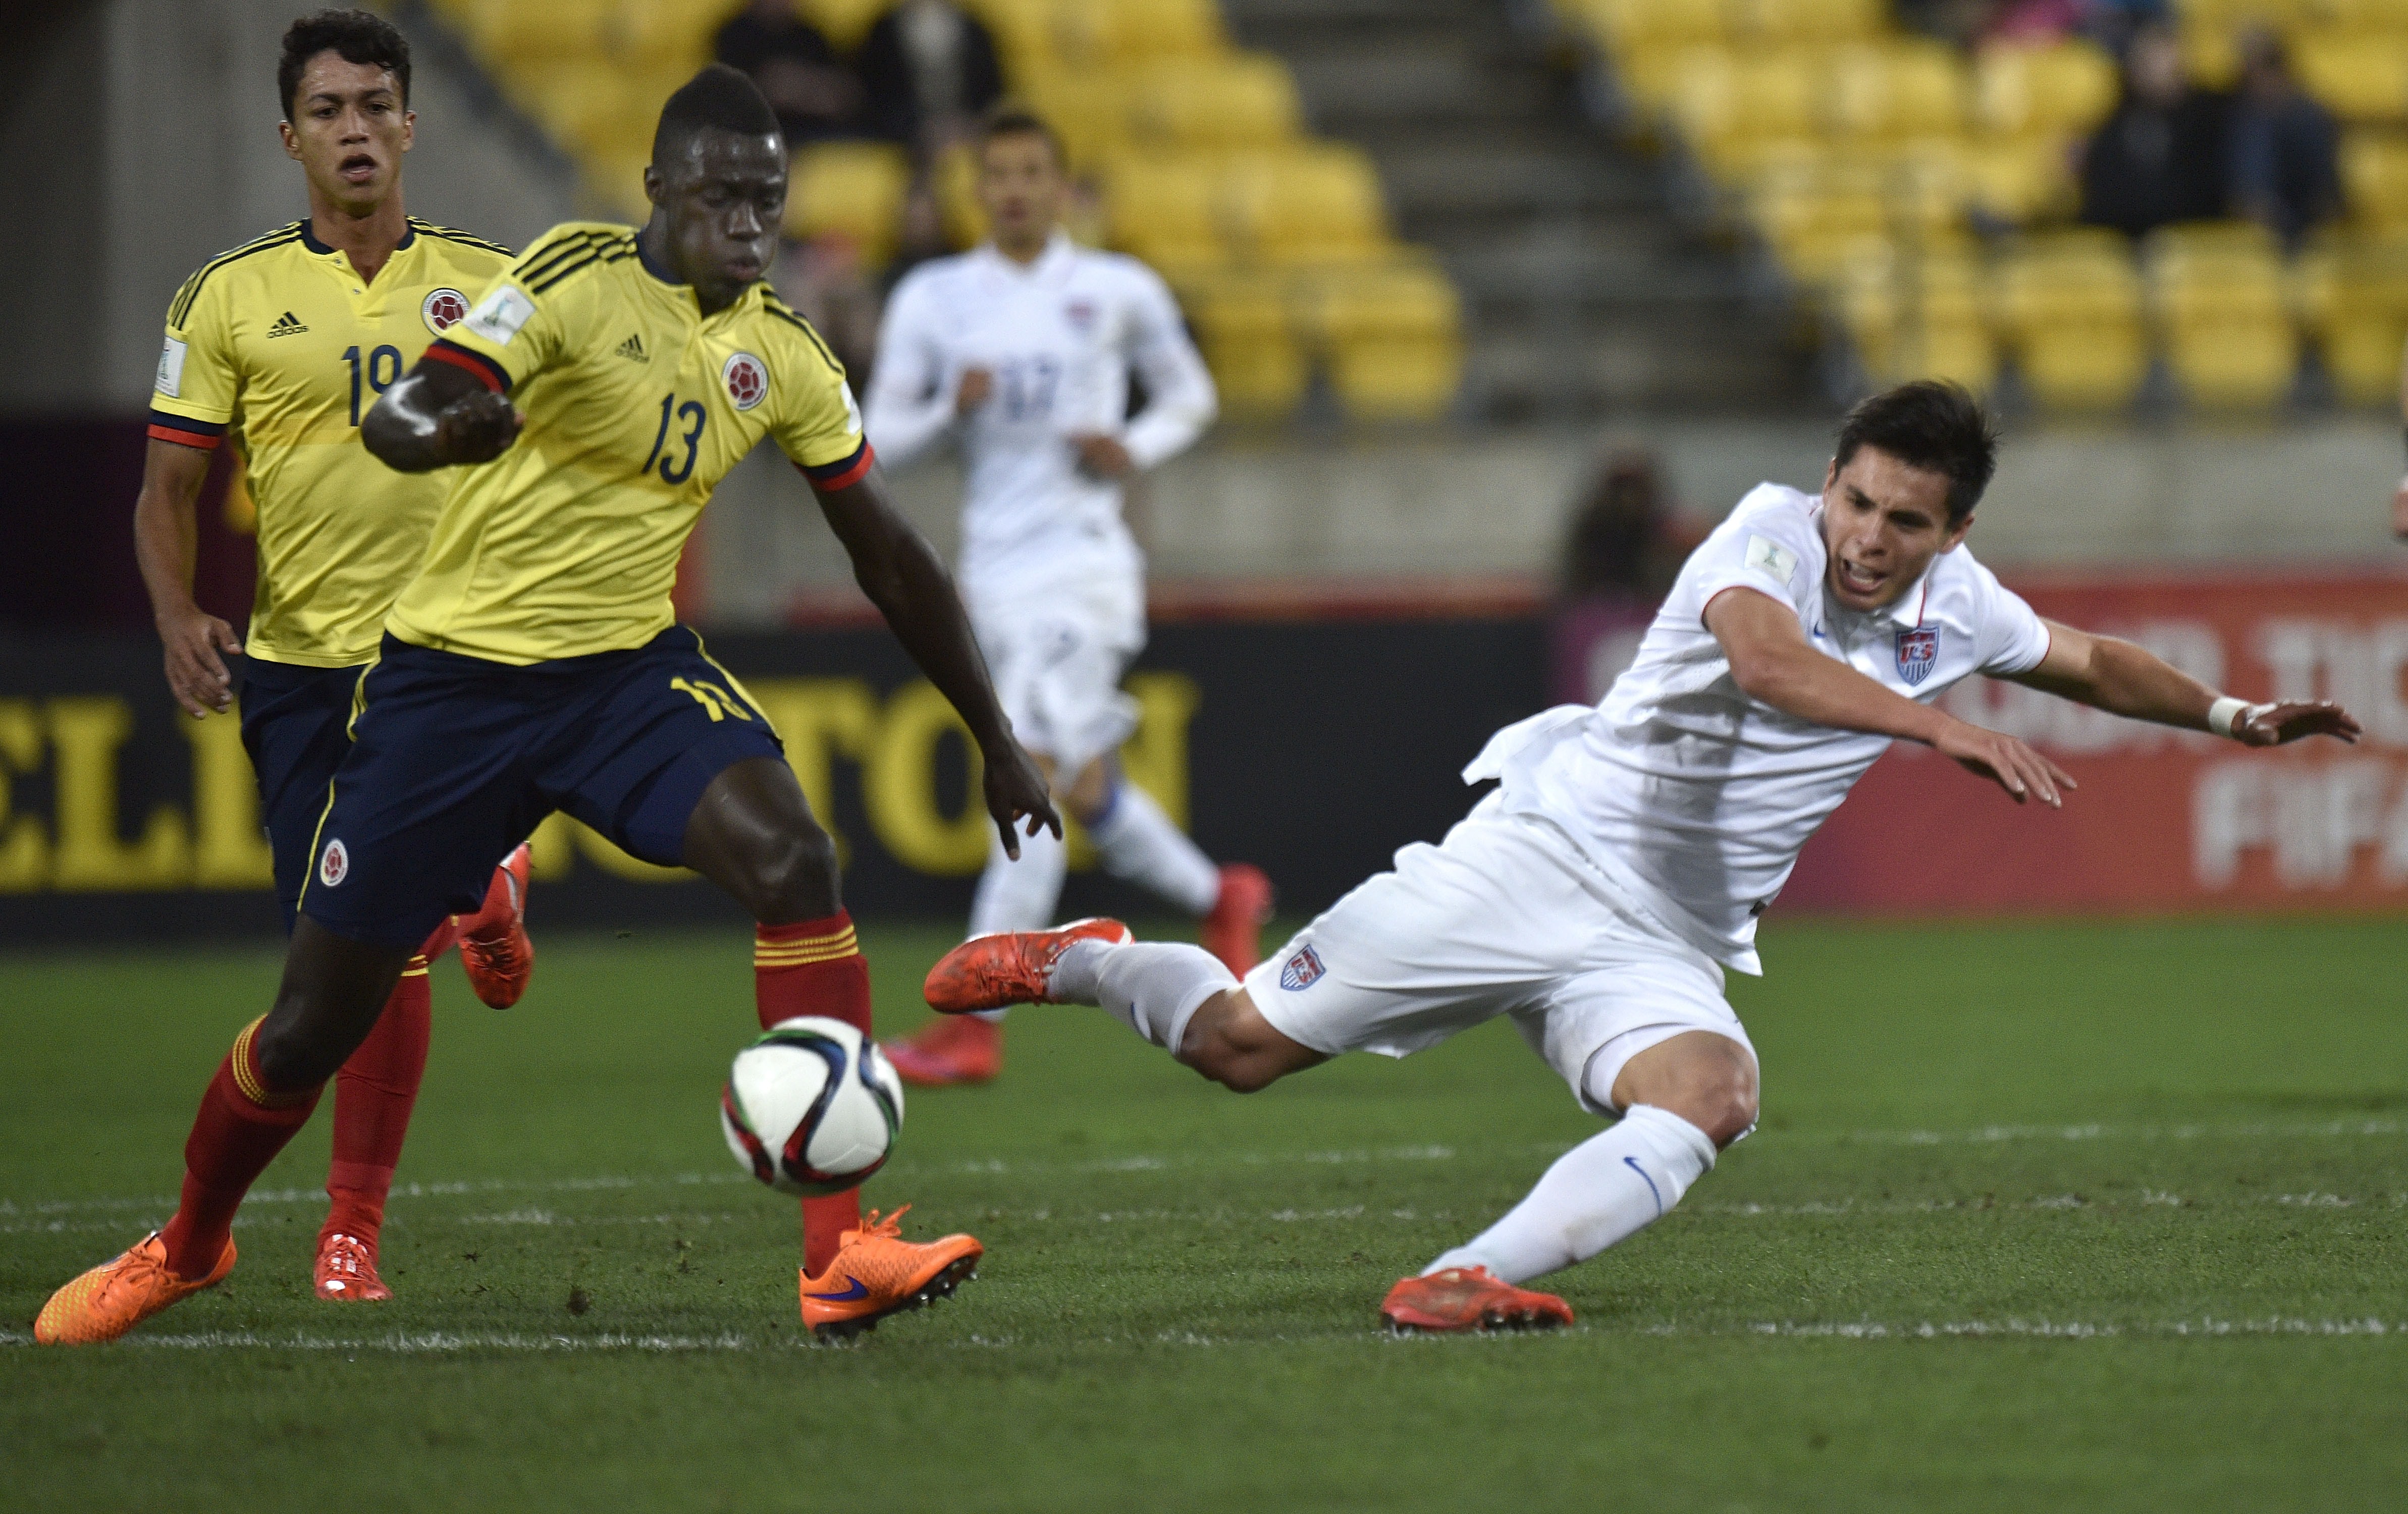 Davinson Sanchez (L) of Colombia fights for the ball with Rubio Rubin of the US during their FIFA Under-20 World Cup round of 16 football match at Wellington Regional Stadium in Wellington on June 10, 2015. AFP PHOTO / MARTY MELVILLE        (Photo credit should read Marty Melville/AFP/Getty Images)